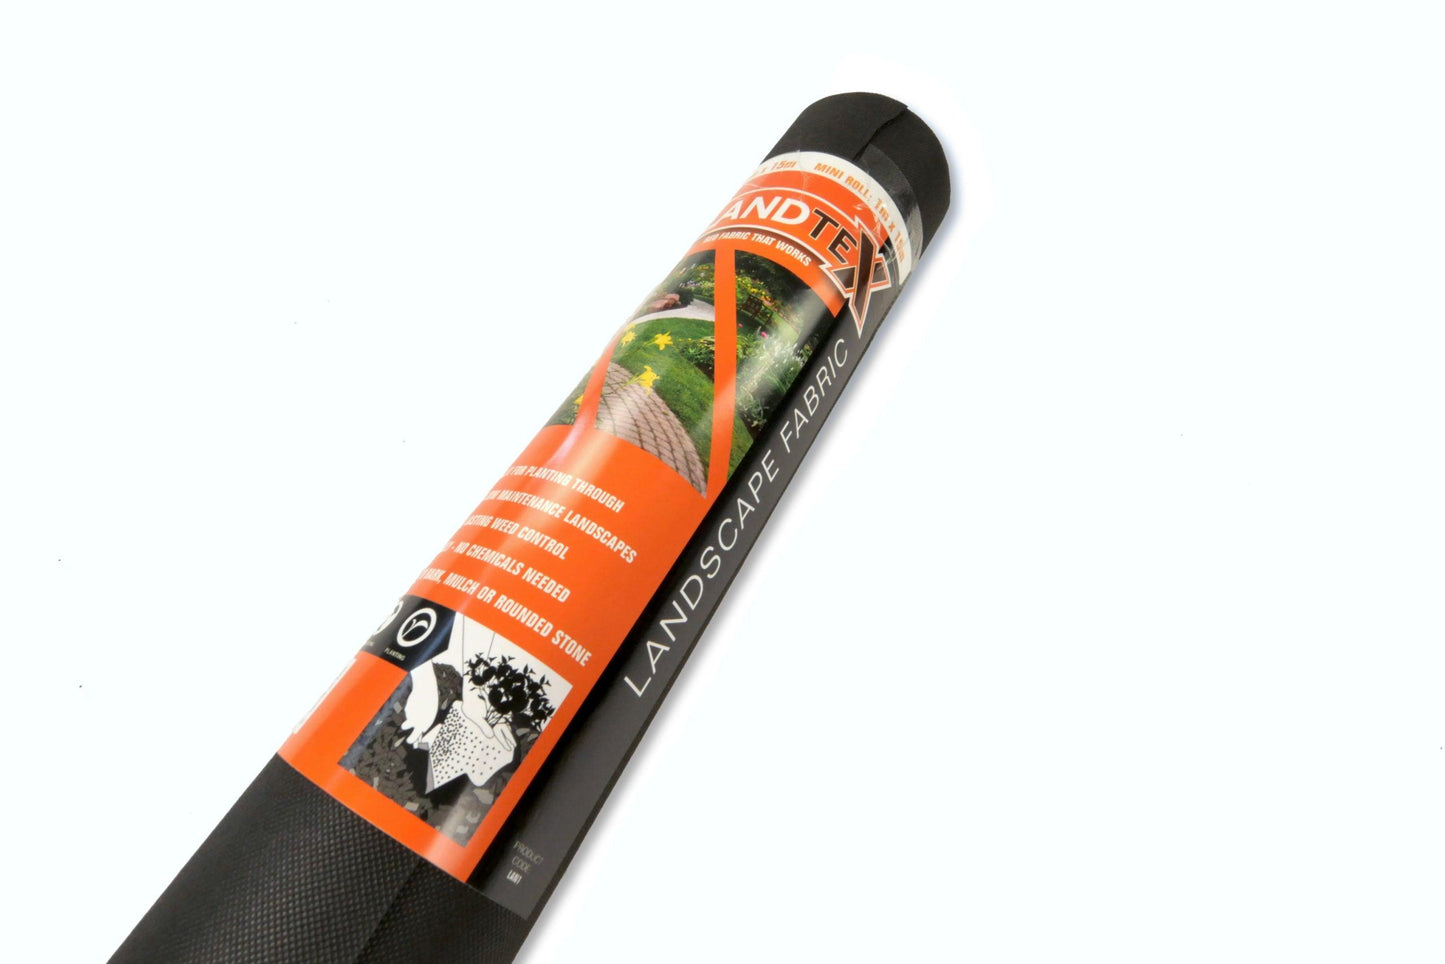 A rolled-up package of Brisks LANDTEX Weed Membrane Fabric. The packaging is predominantly orange and black, featuring images of garden landscapes and an illustration of fabric being laid out. The text highlights product features, usage instructions, and its effectiveness as an eco-friendly weed barrier.